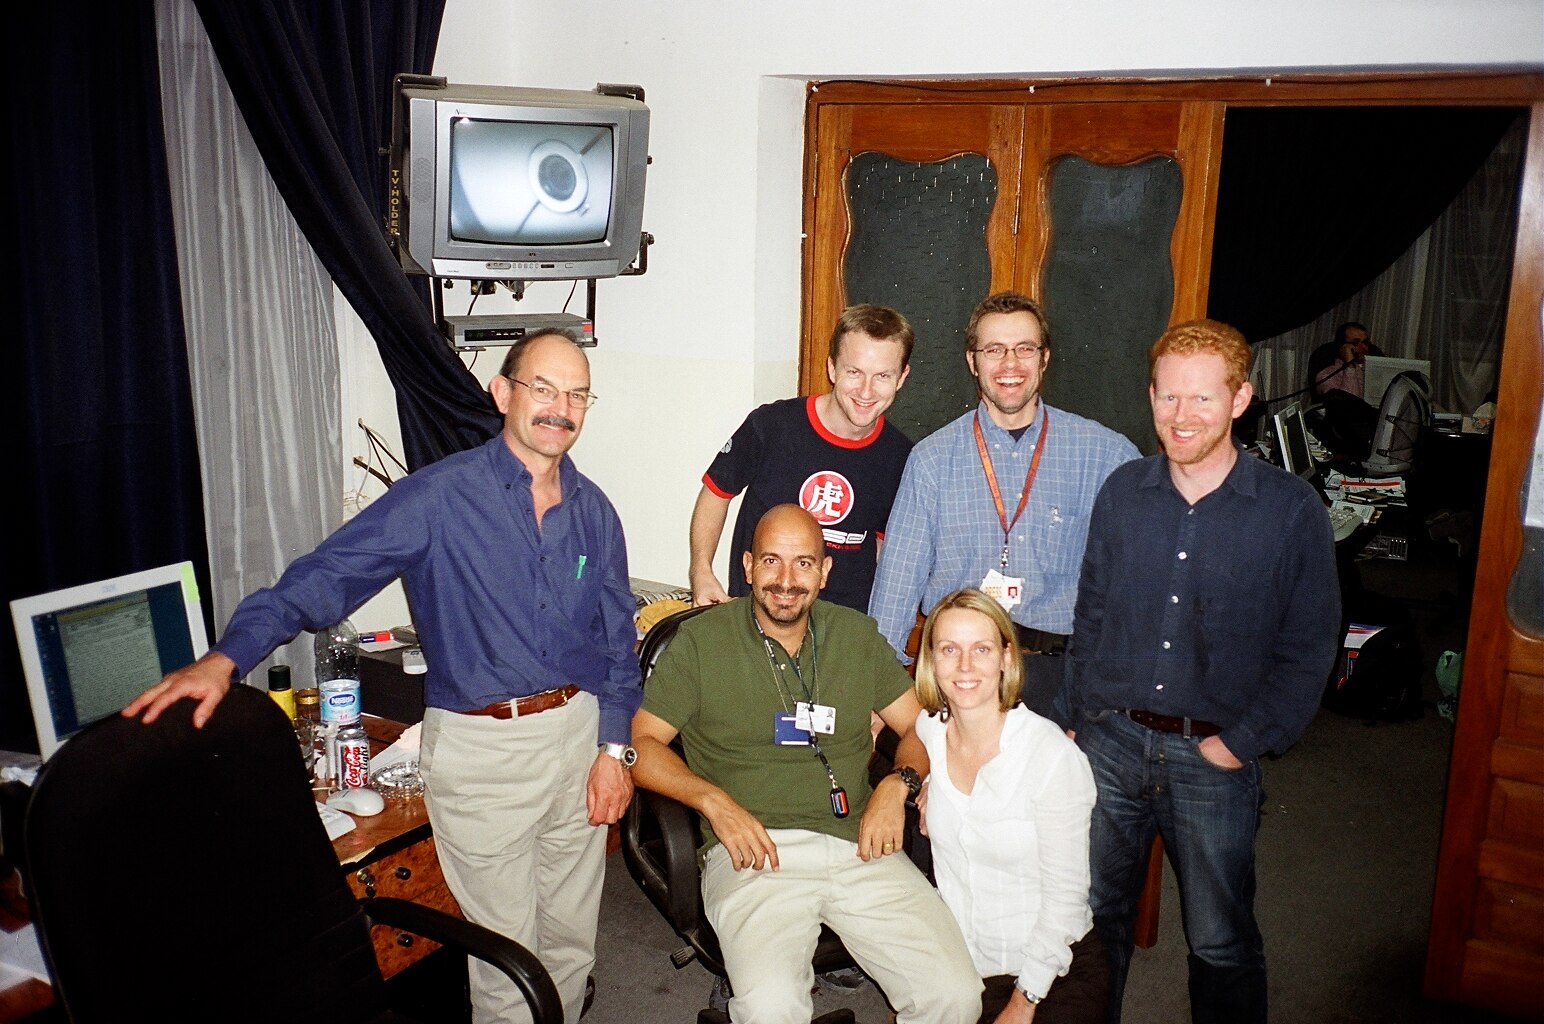 A group photo of colleagues in an office setting consisting of five men and one woman